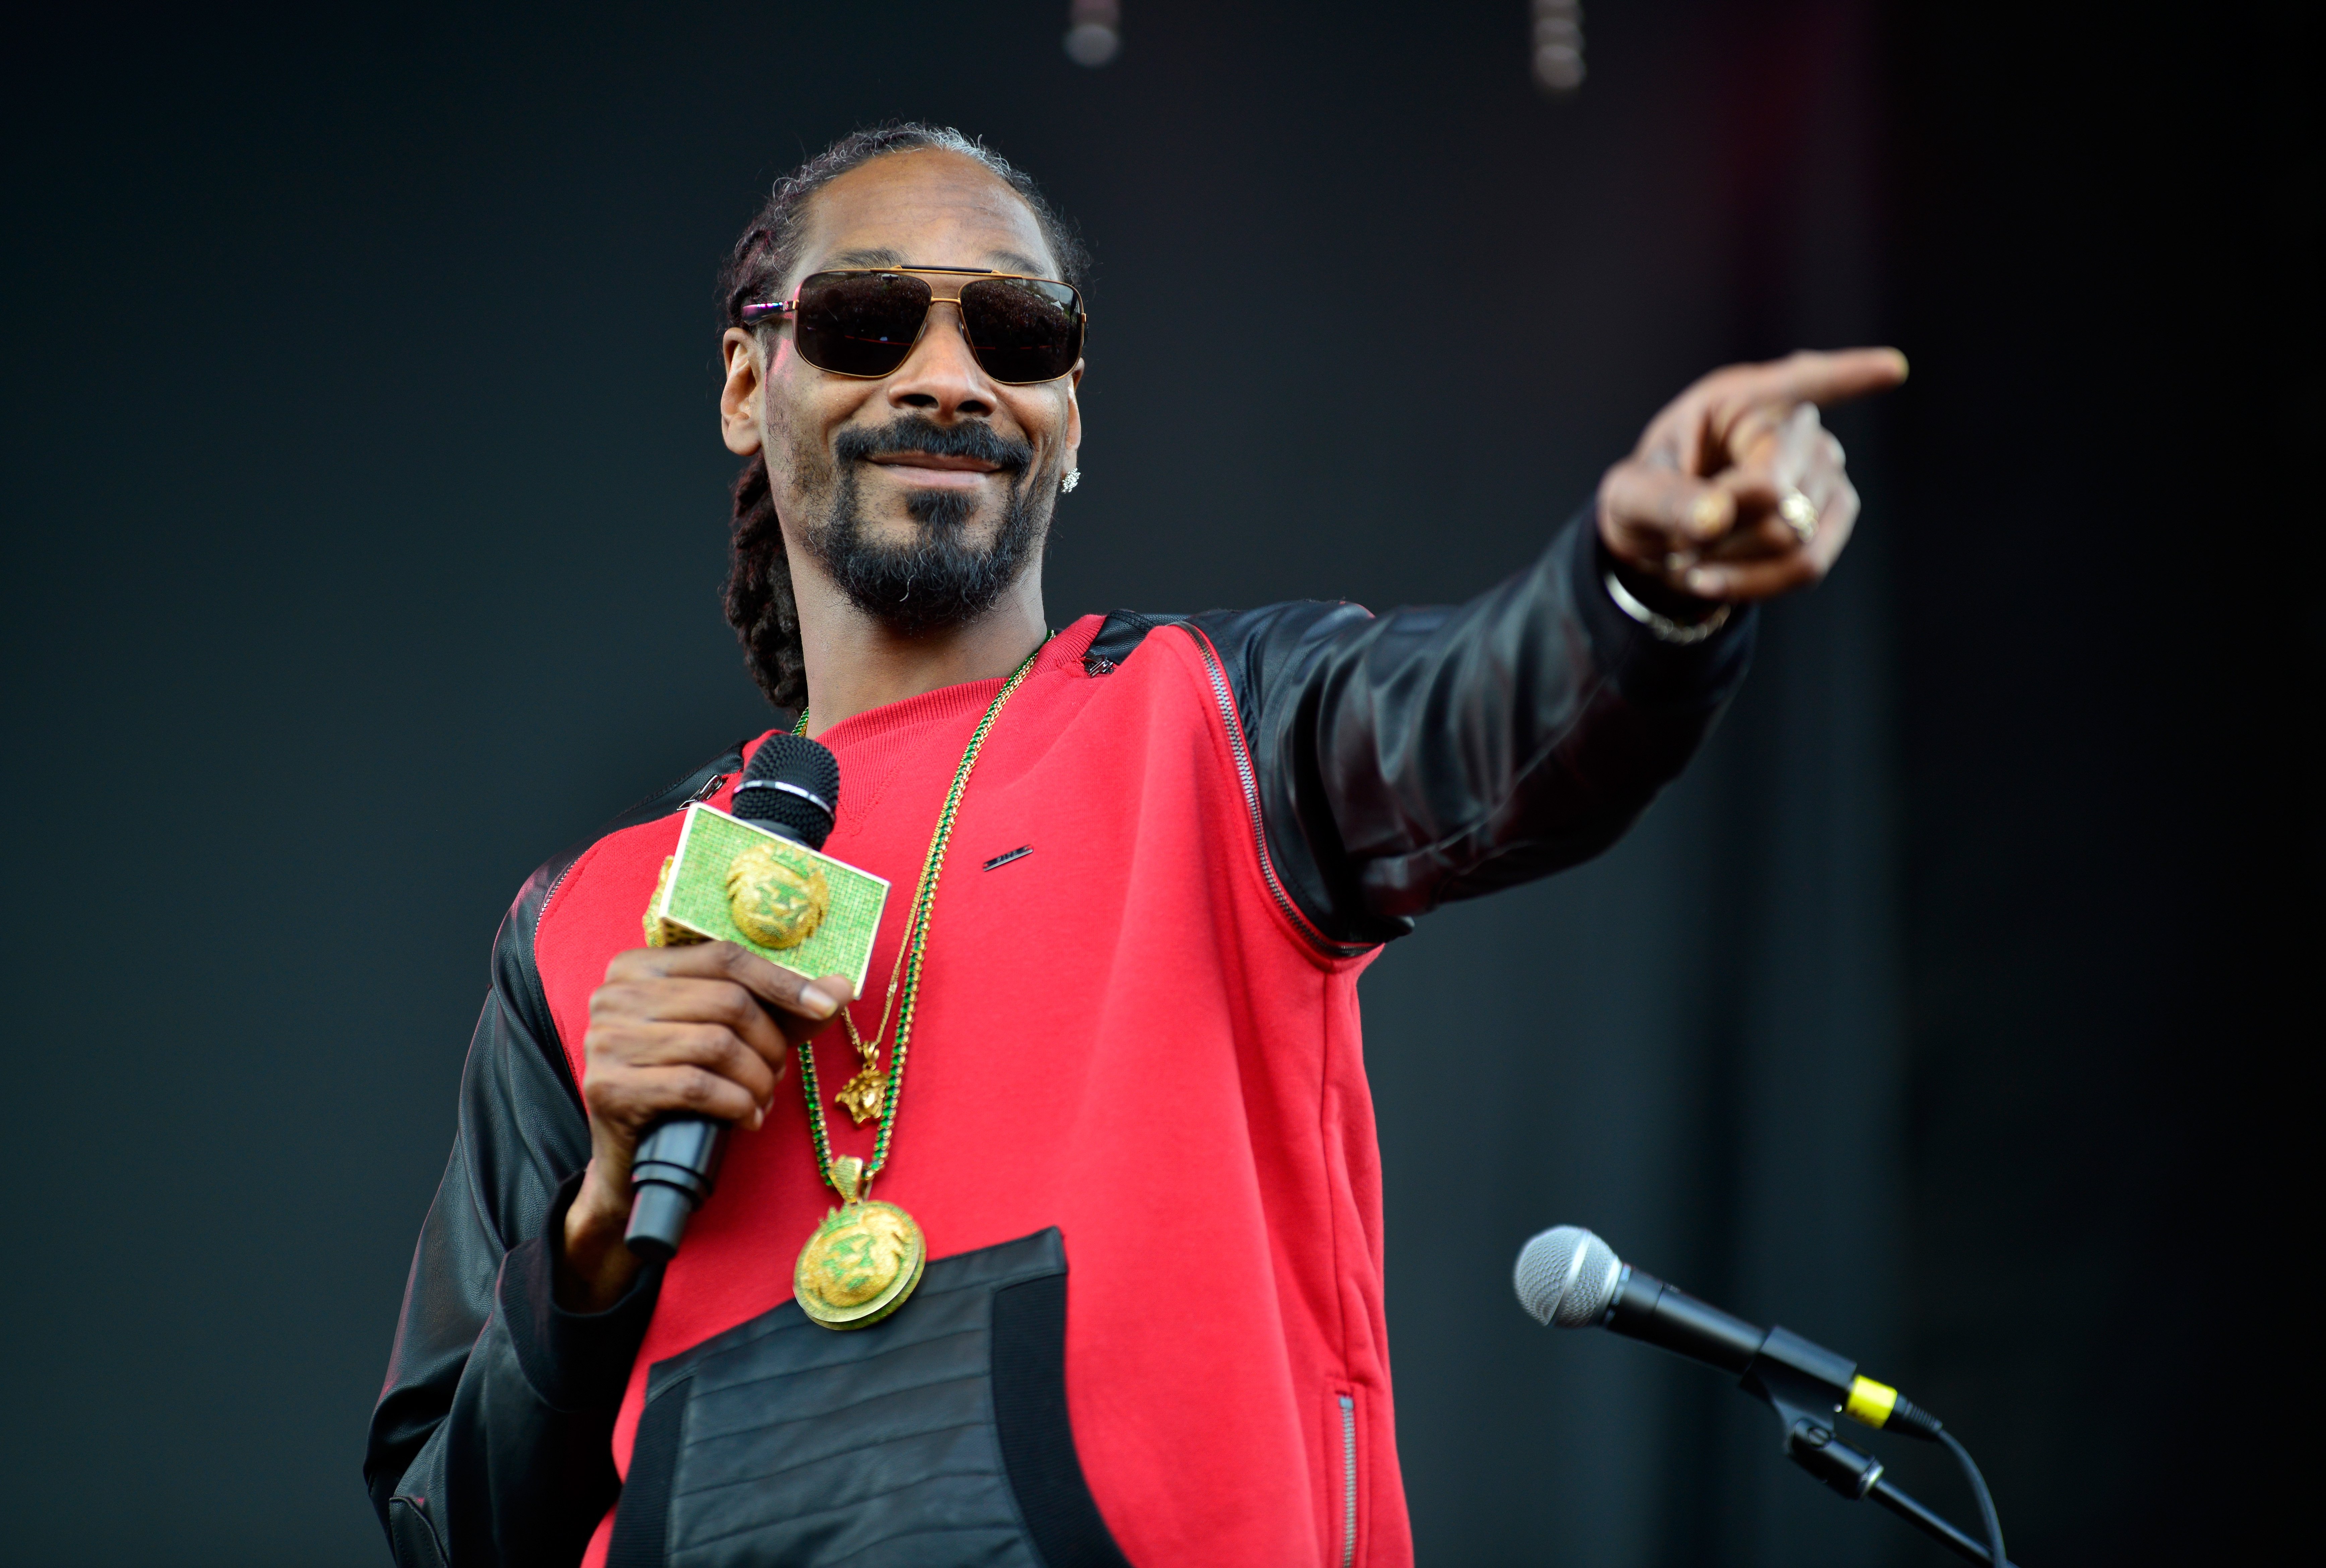 Snoop Dogg onstage during the 2014 SXSW Music, Film + Interactive Festival in Austin, Texas on March 15, 2014 | Photo: Getty Images